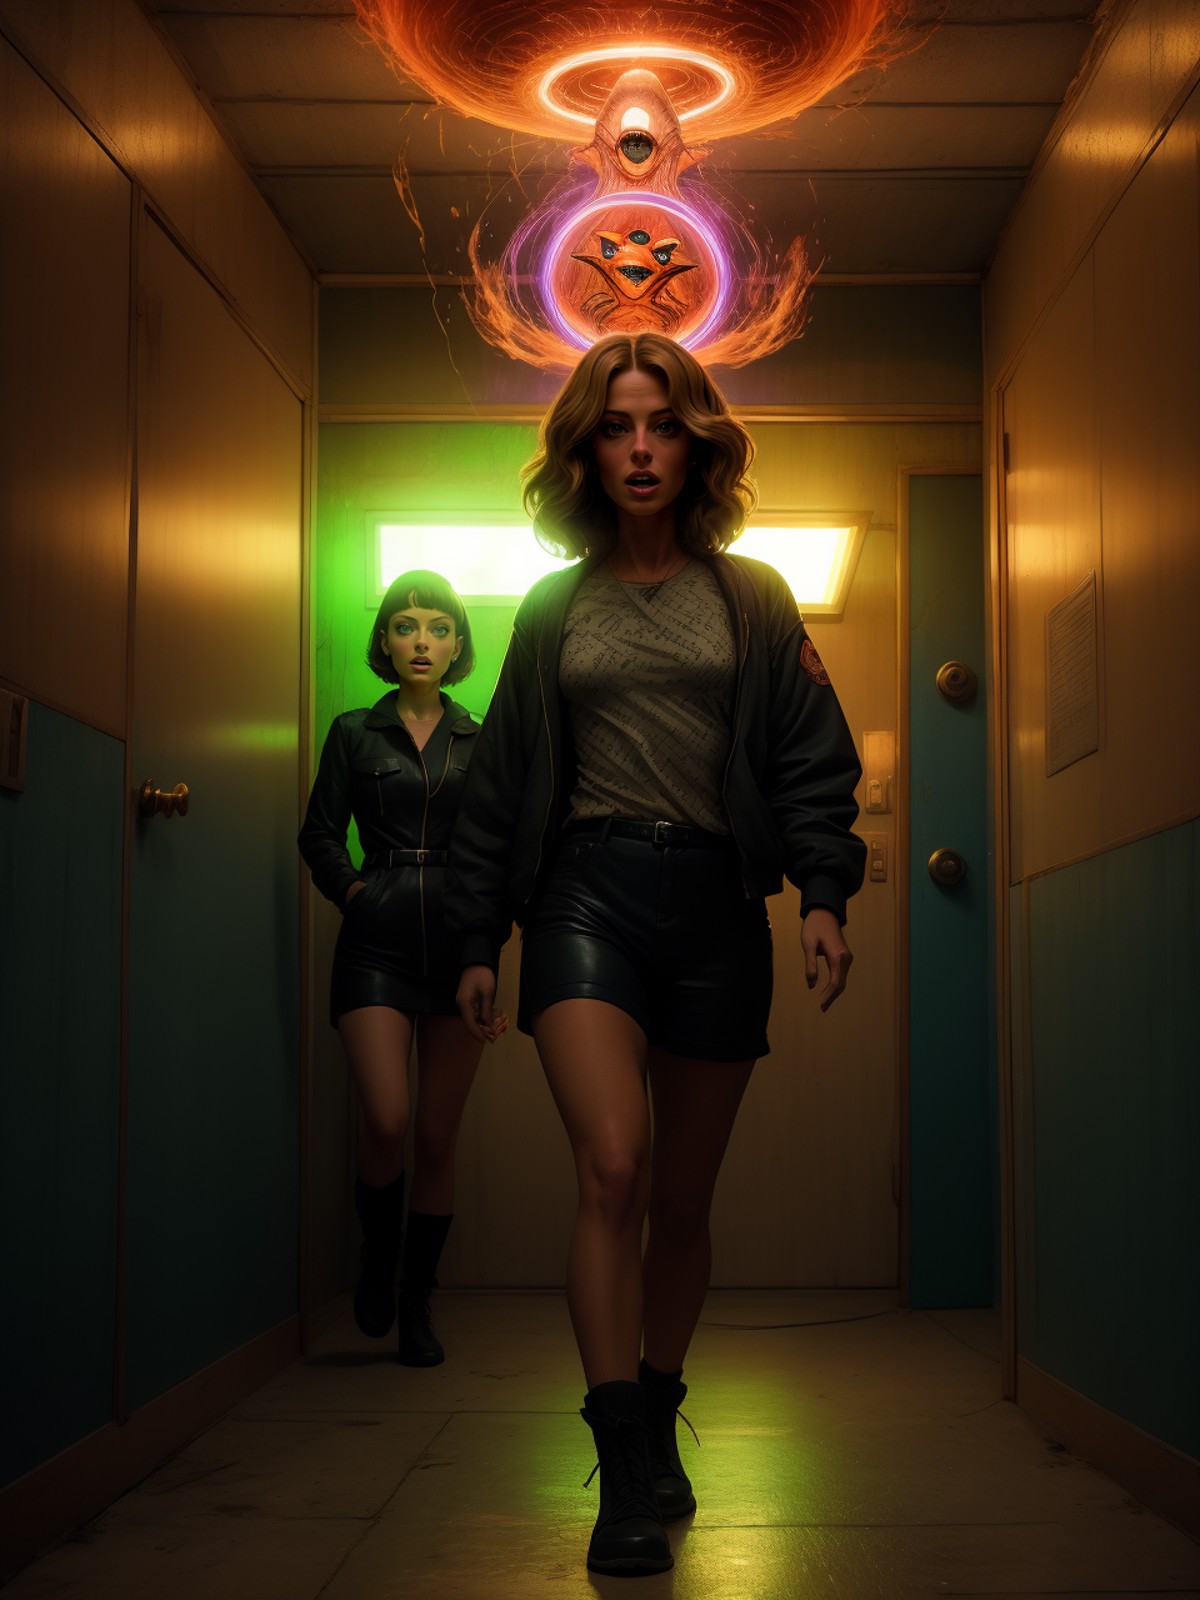 [Aly Michalka|Farrah Fawcett] battling the hypnotoad, Stranger Things Style, by H. R. Giger,